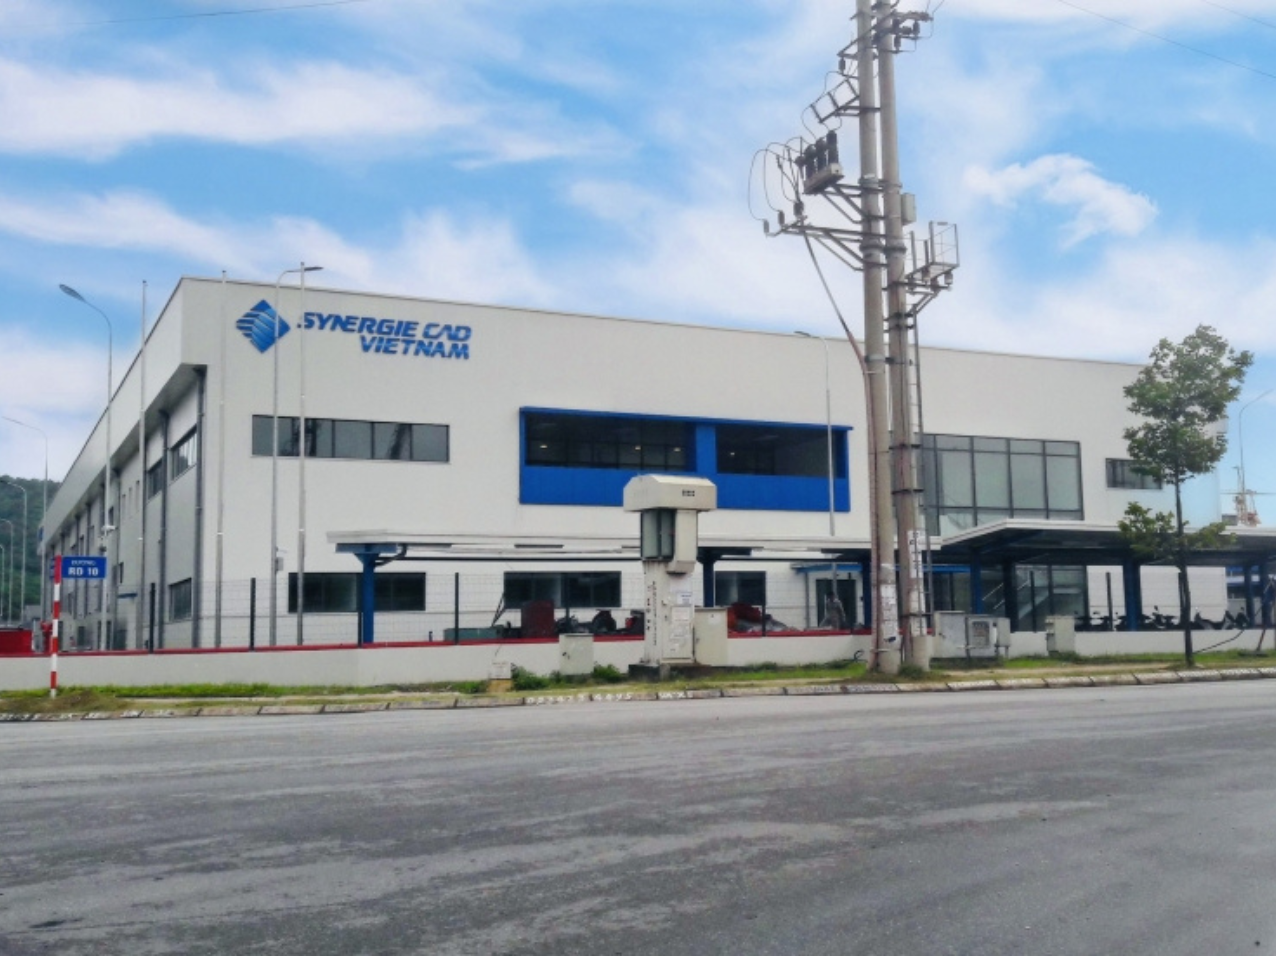 Synergie Cad Vietnam Factory